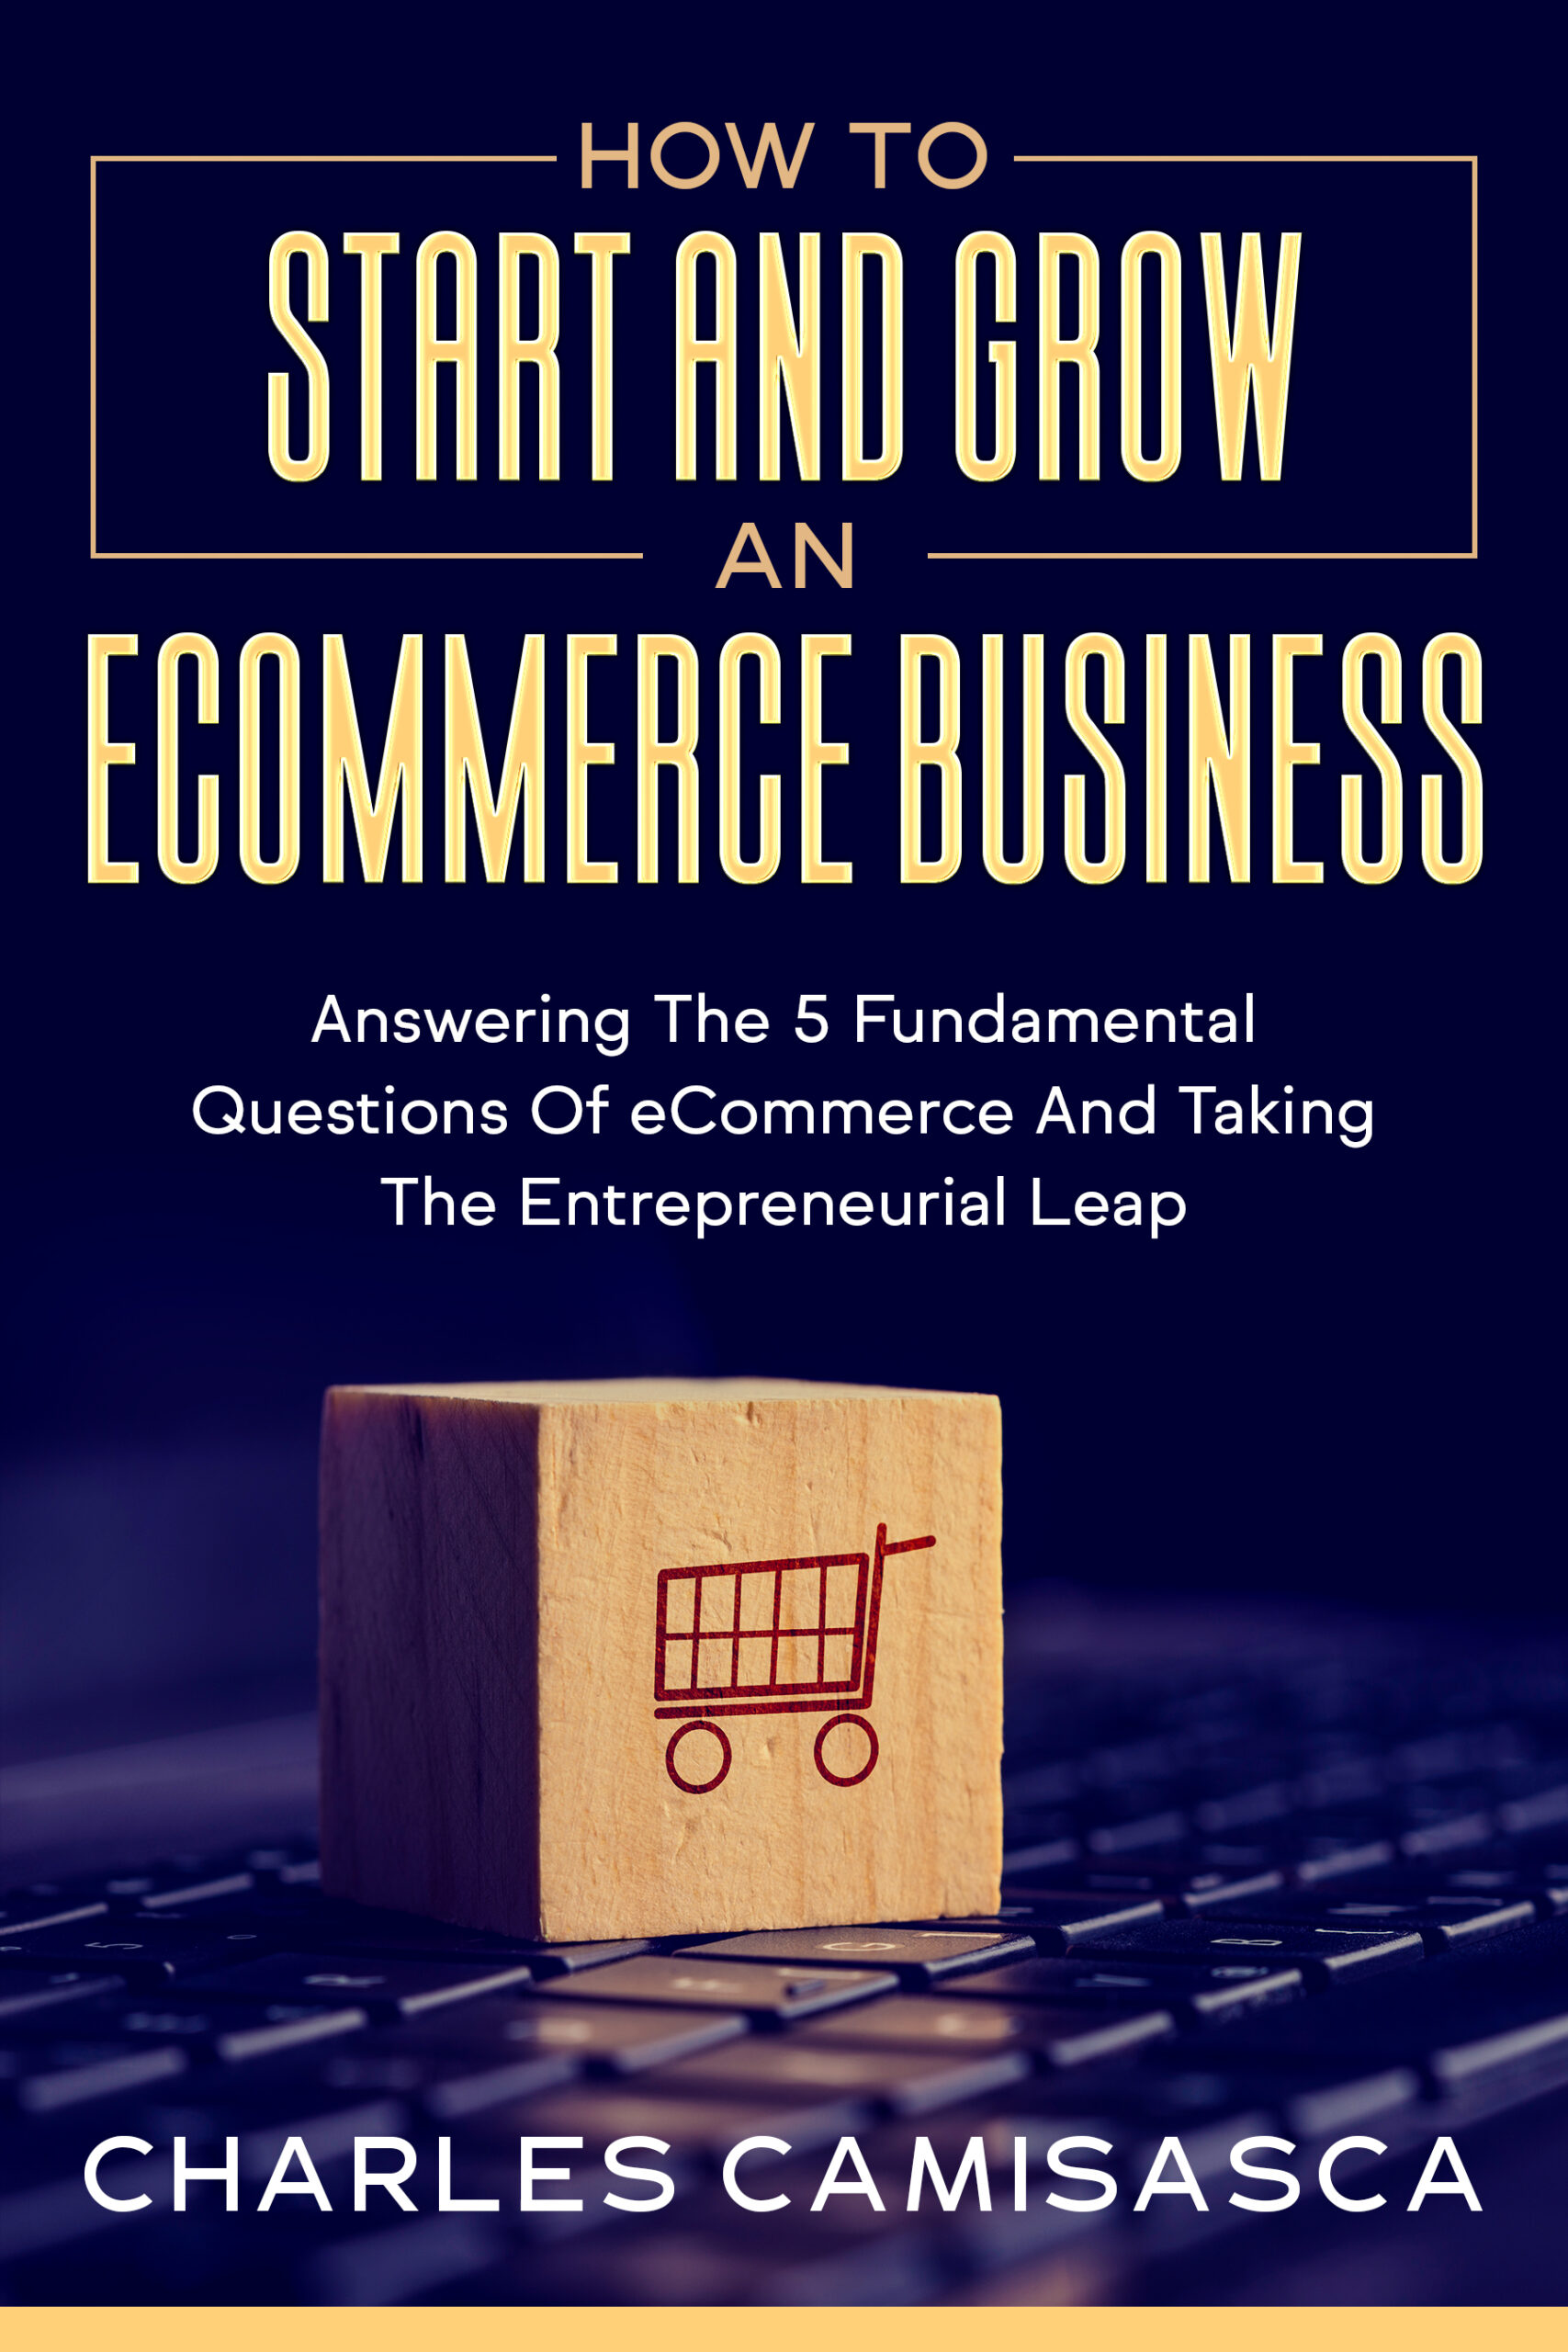 How to Start and Grow an E-Commerce Business by Charles Camisasca